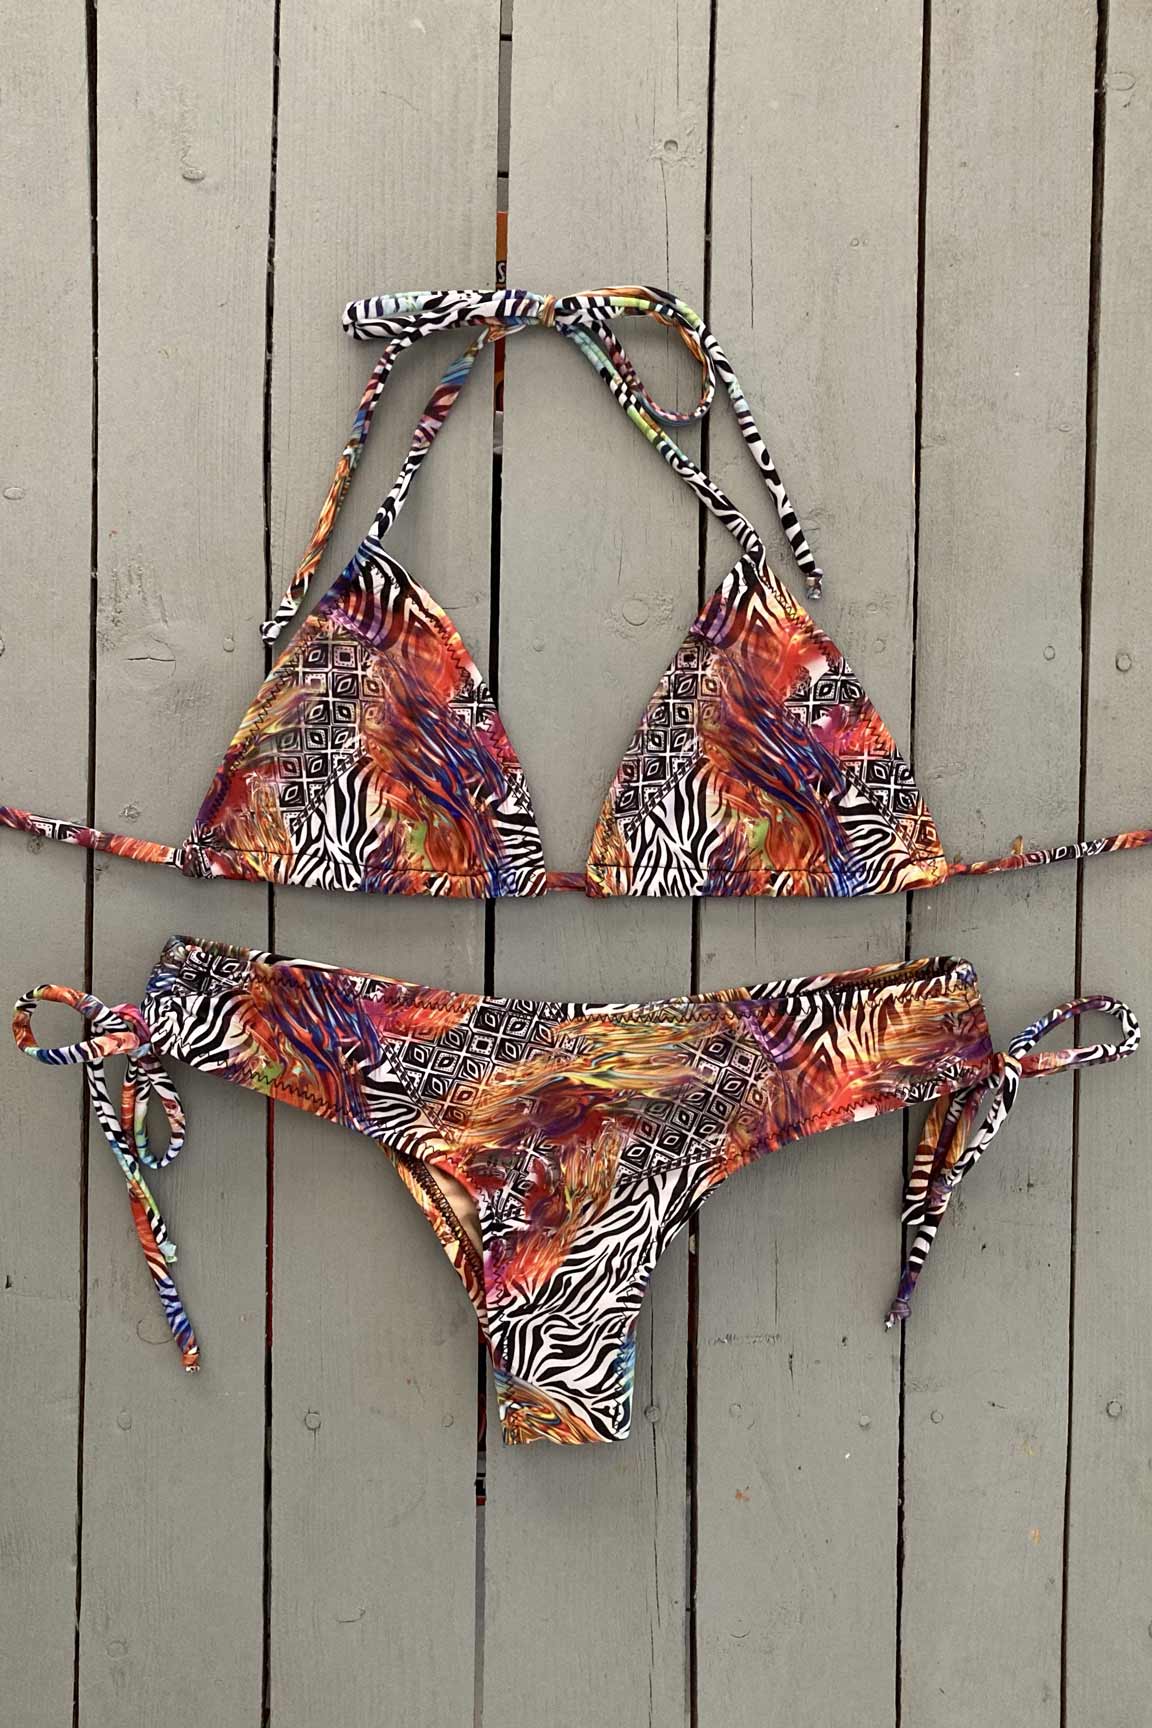 Enjoy days at the beach or pool in this zebra print wide cinched bikini bottom. Made with the finest quality of soft and stretchy Lycra to achieve the best fit. Order yours today. @jillesbikinis 